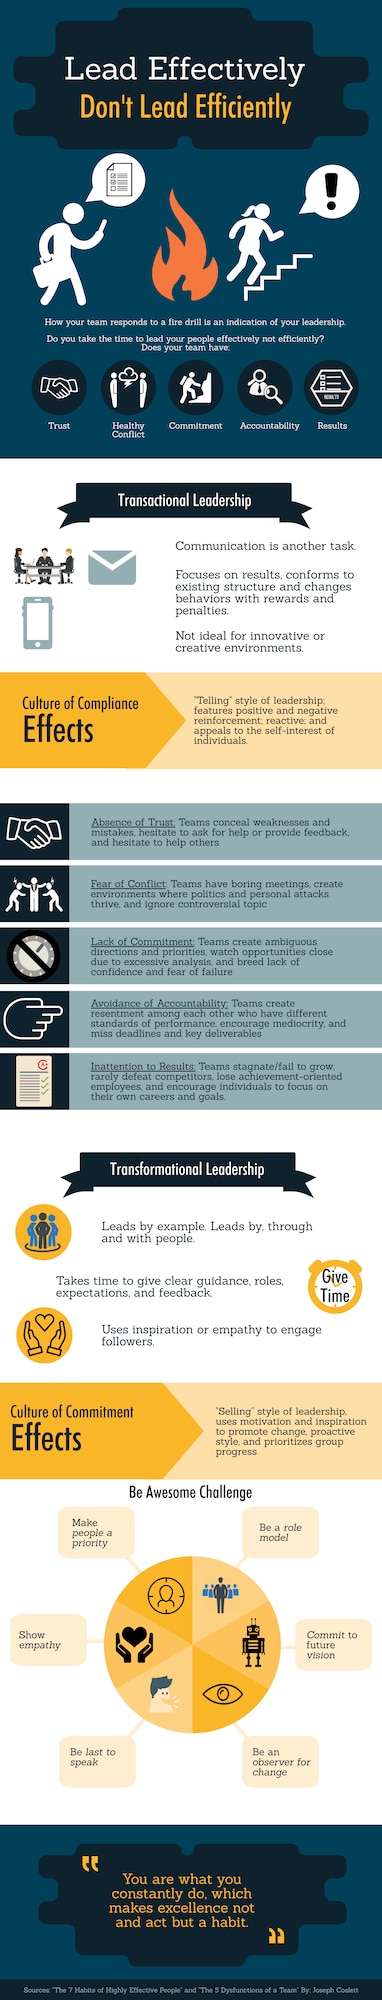 The graphic illustrates using a fire drill to compare transactional leadership to transformational leadership to form a culture of commitment. The purpose is to give advice to managers, supervisors and leaders to lead people effectively not efficiently. (U.S. Air Force graphic by Joseph Coslett)